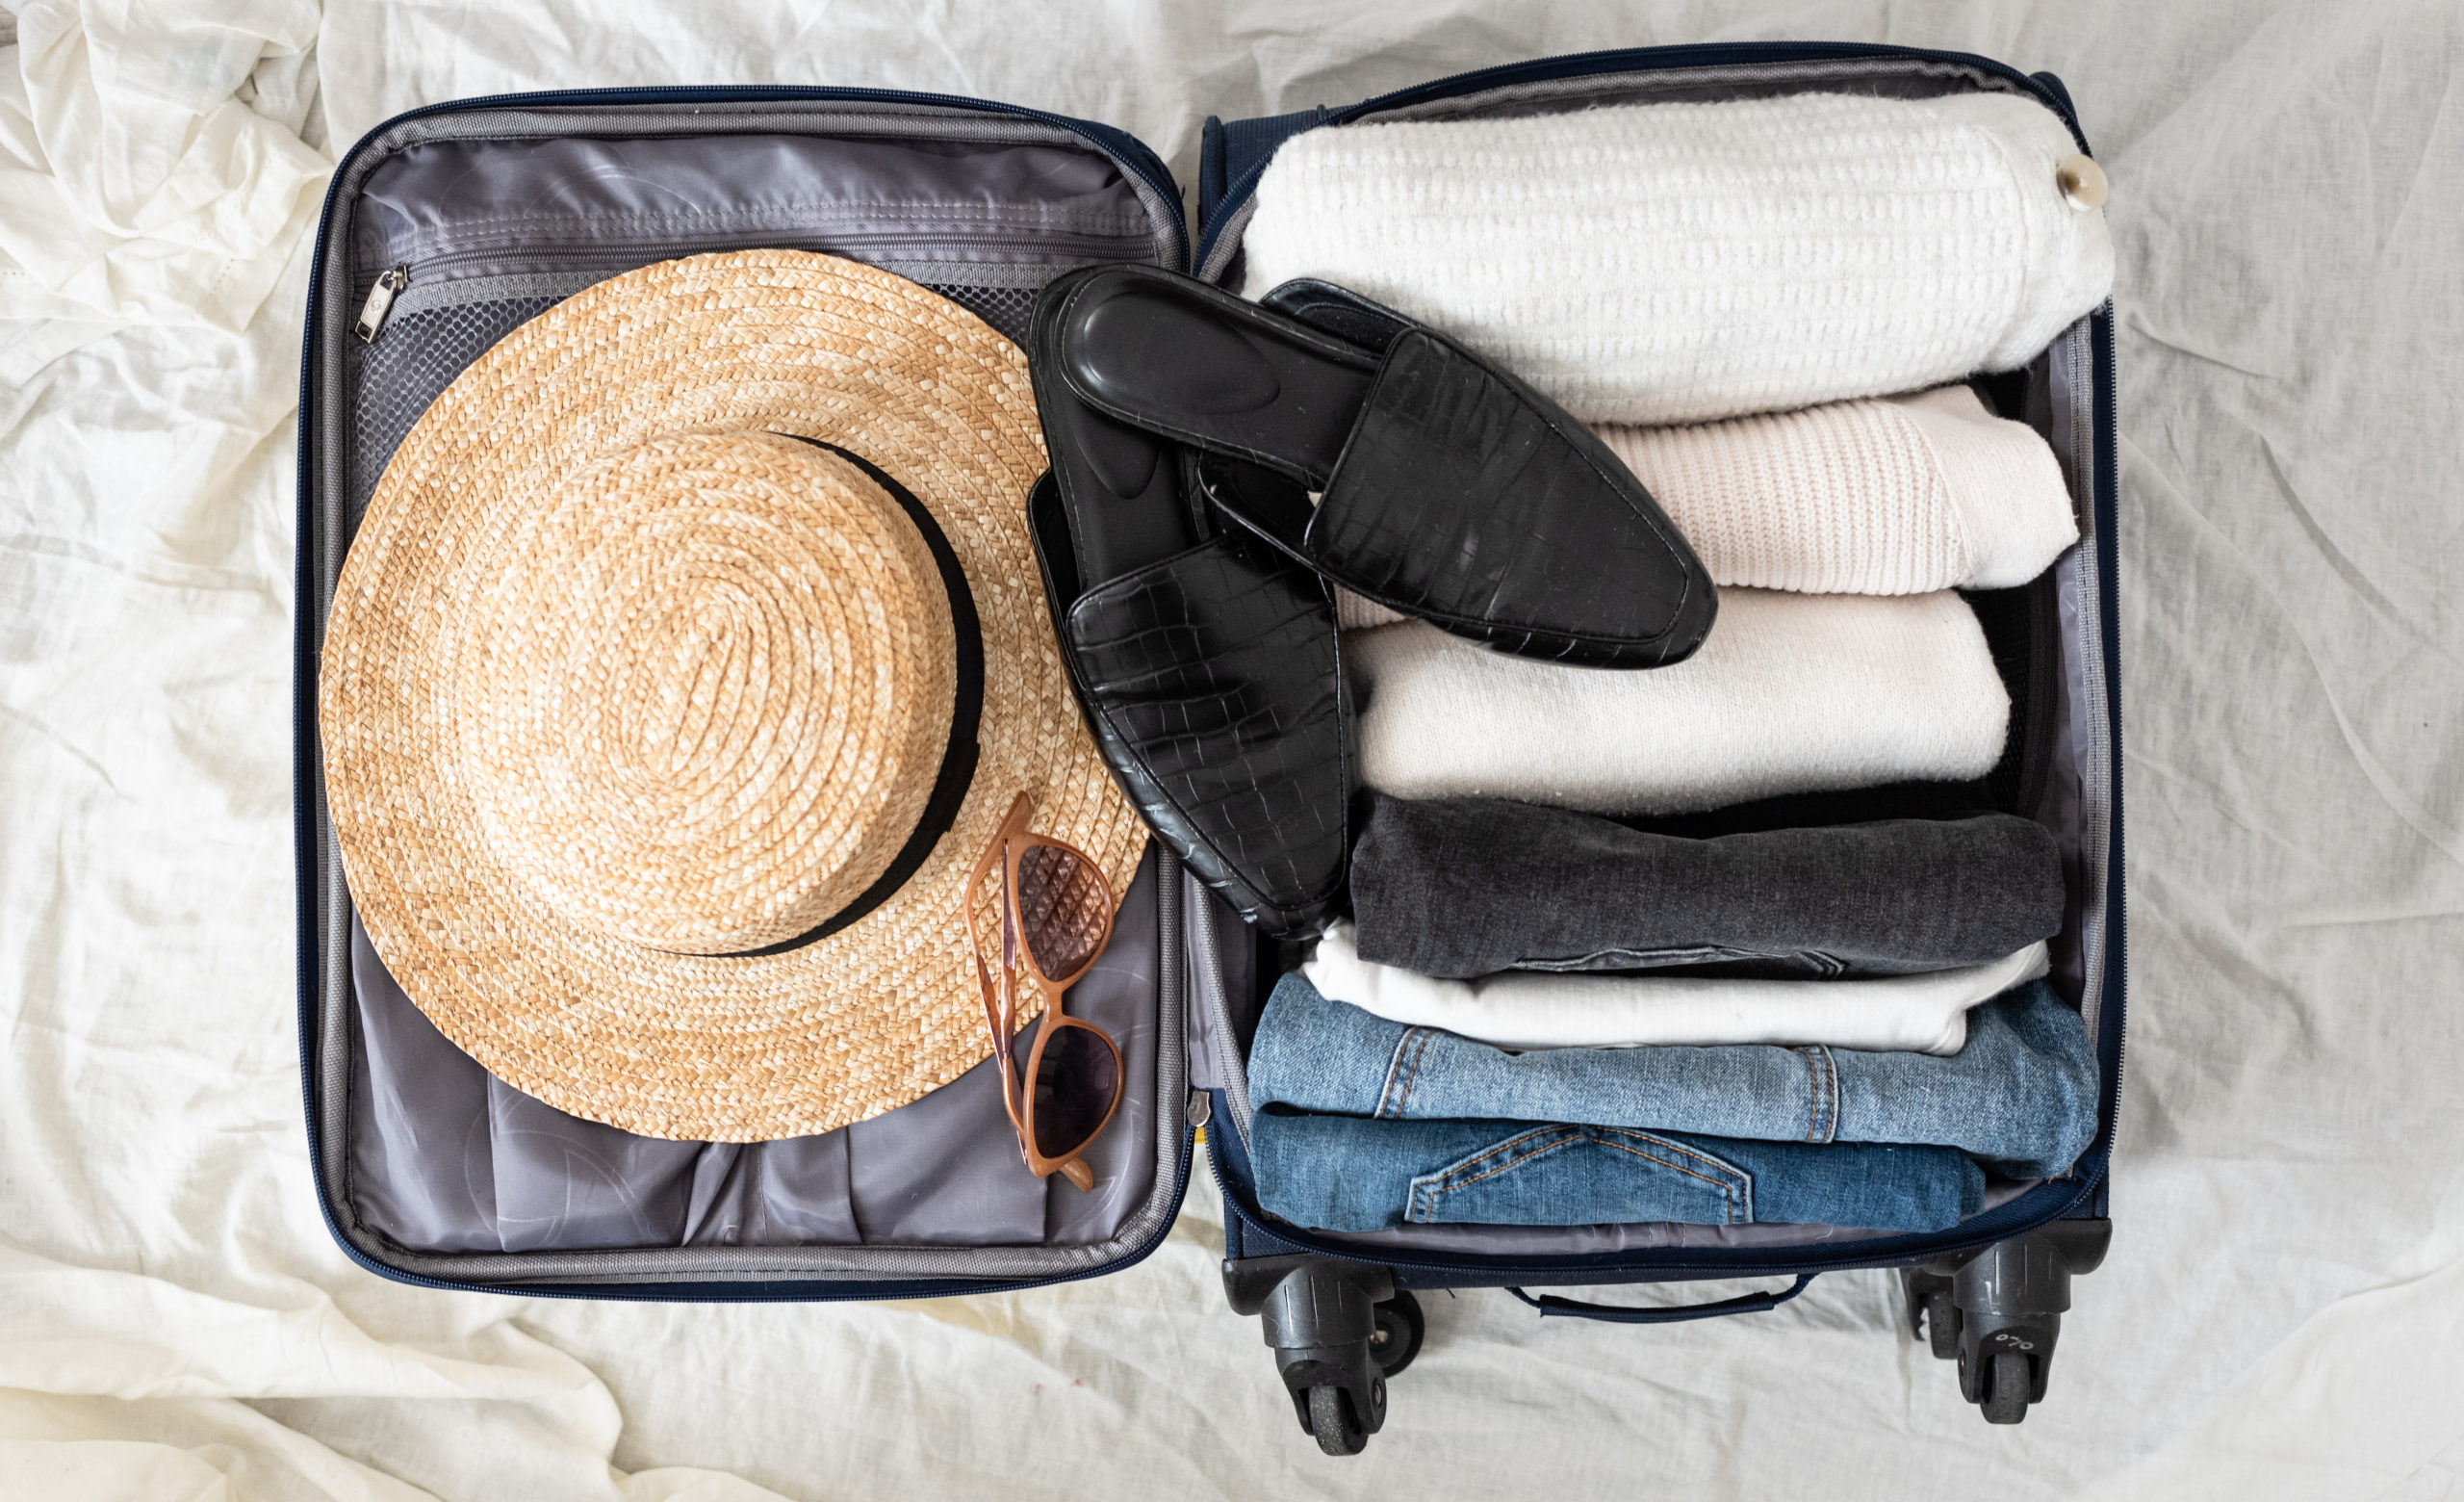 Deal with Travel Anxiety with these Tips for a Successful Trip